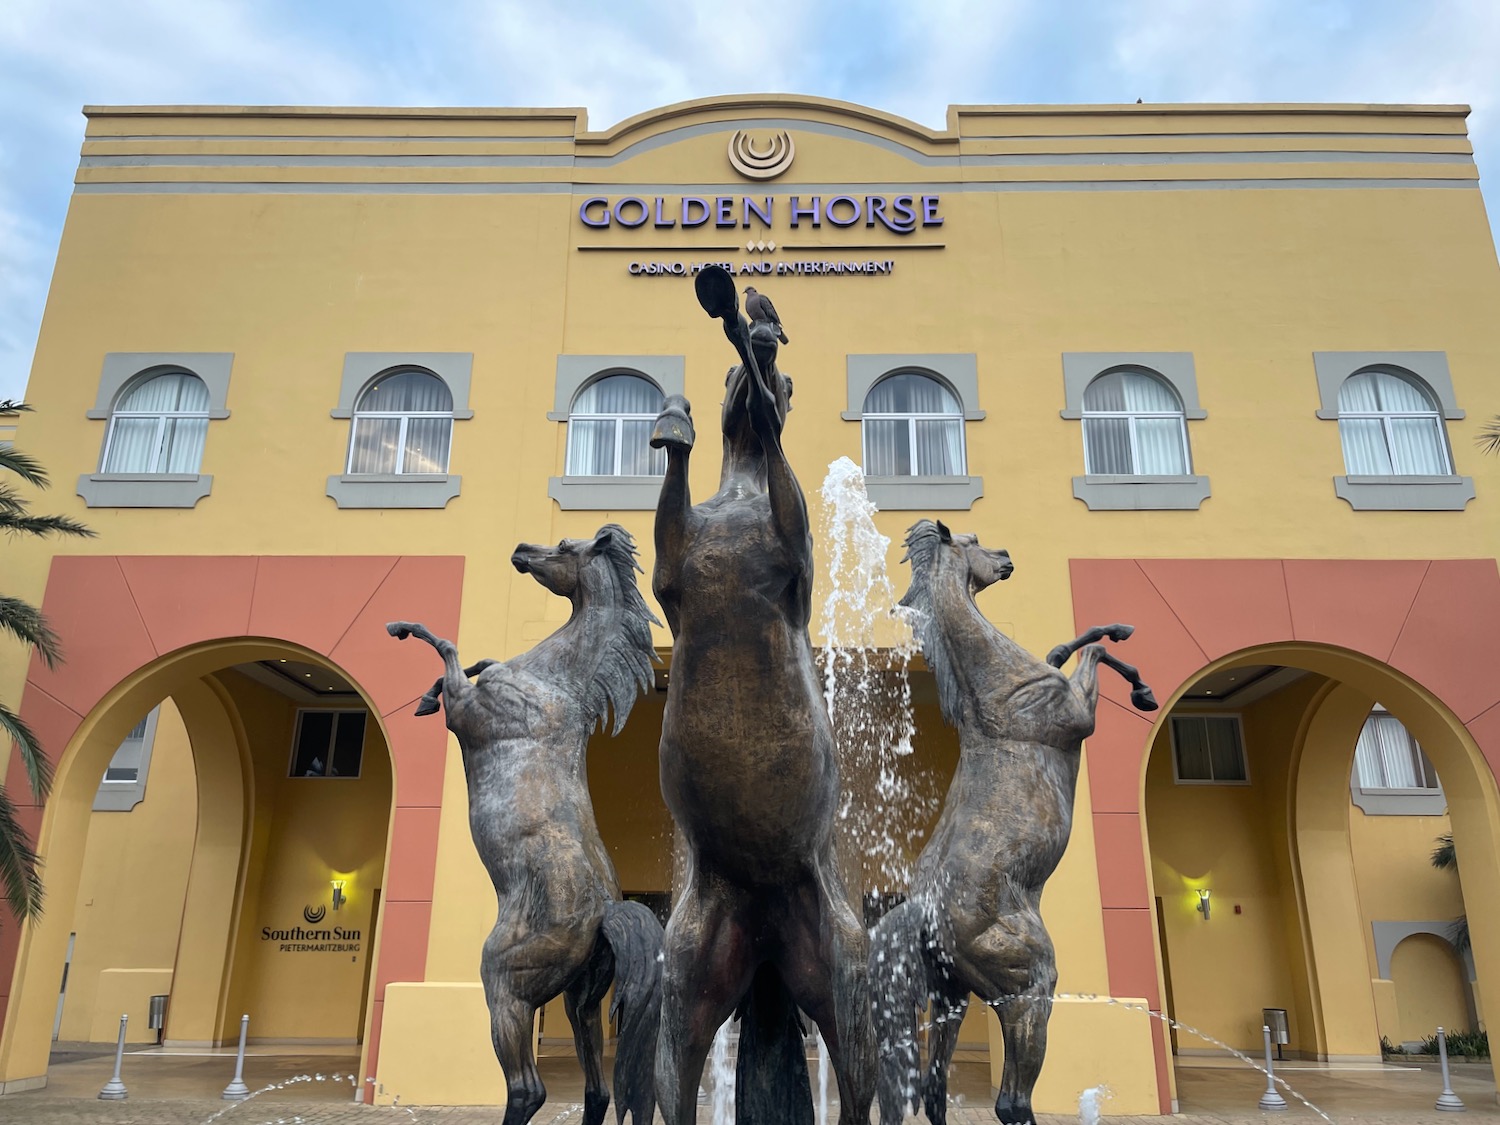 a statue of horses in front of a building